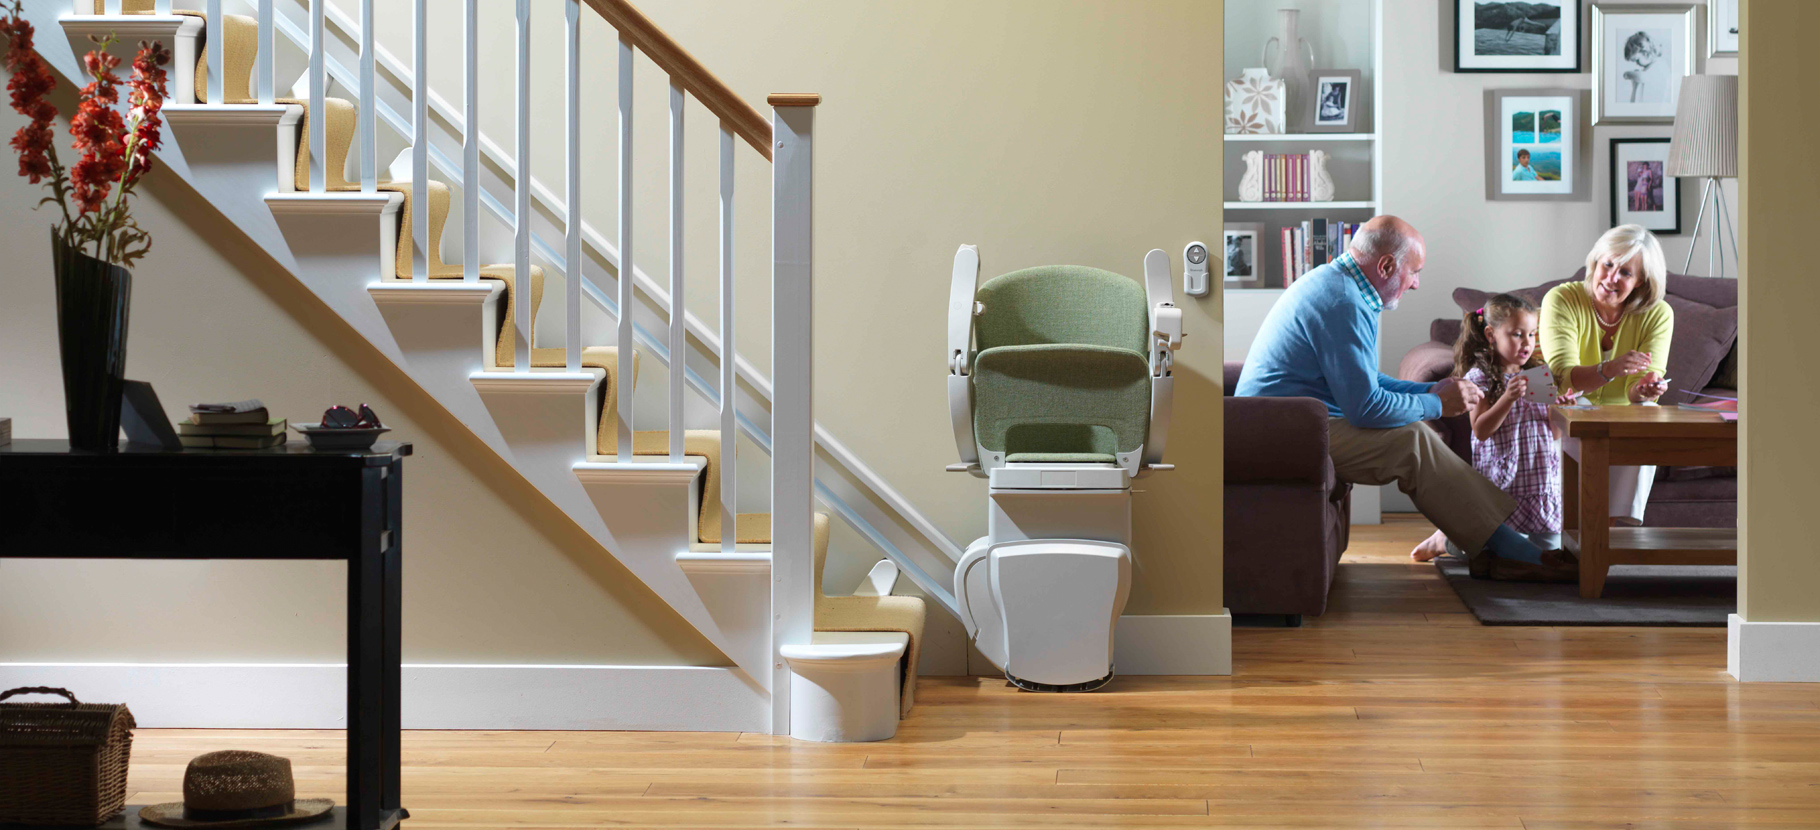 Stannah-Stairlift